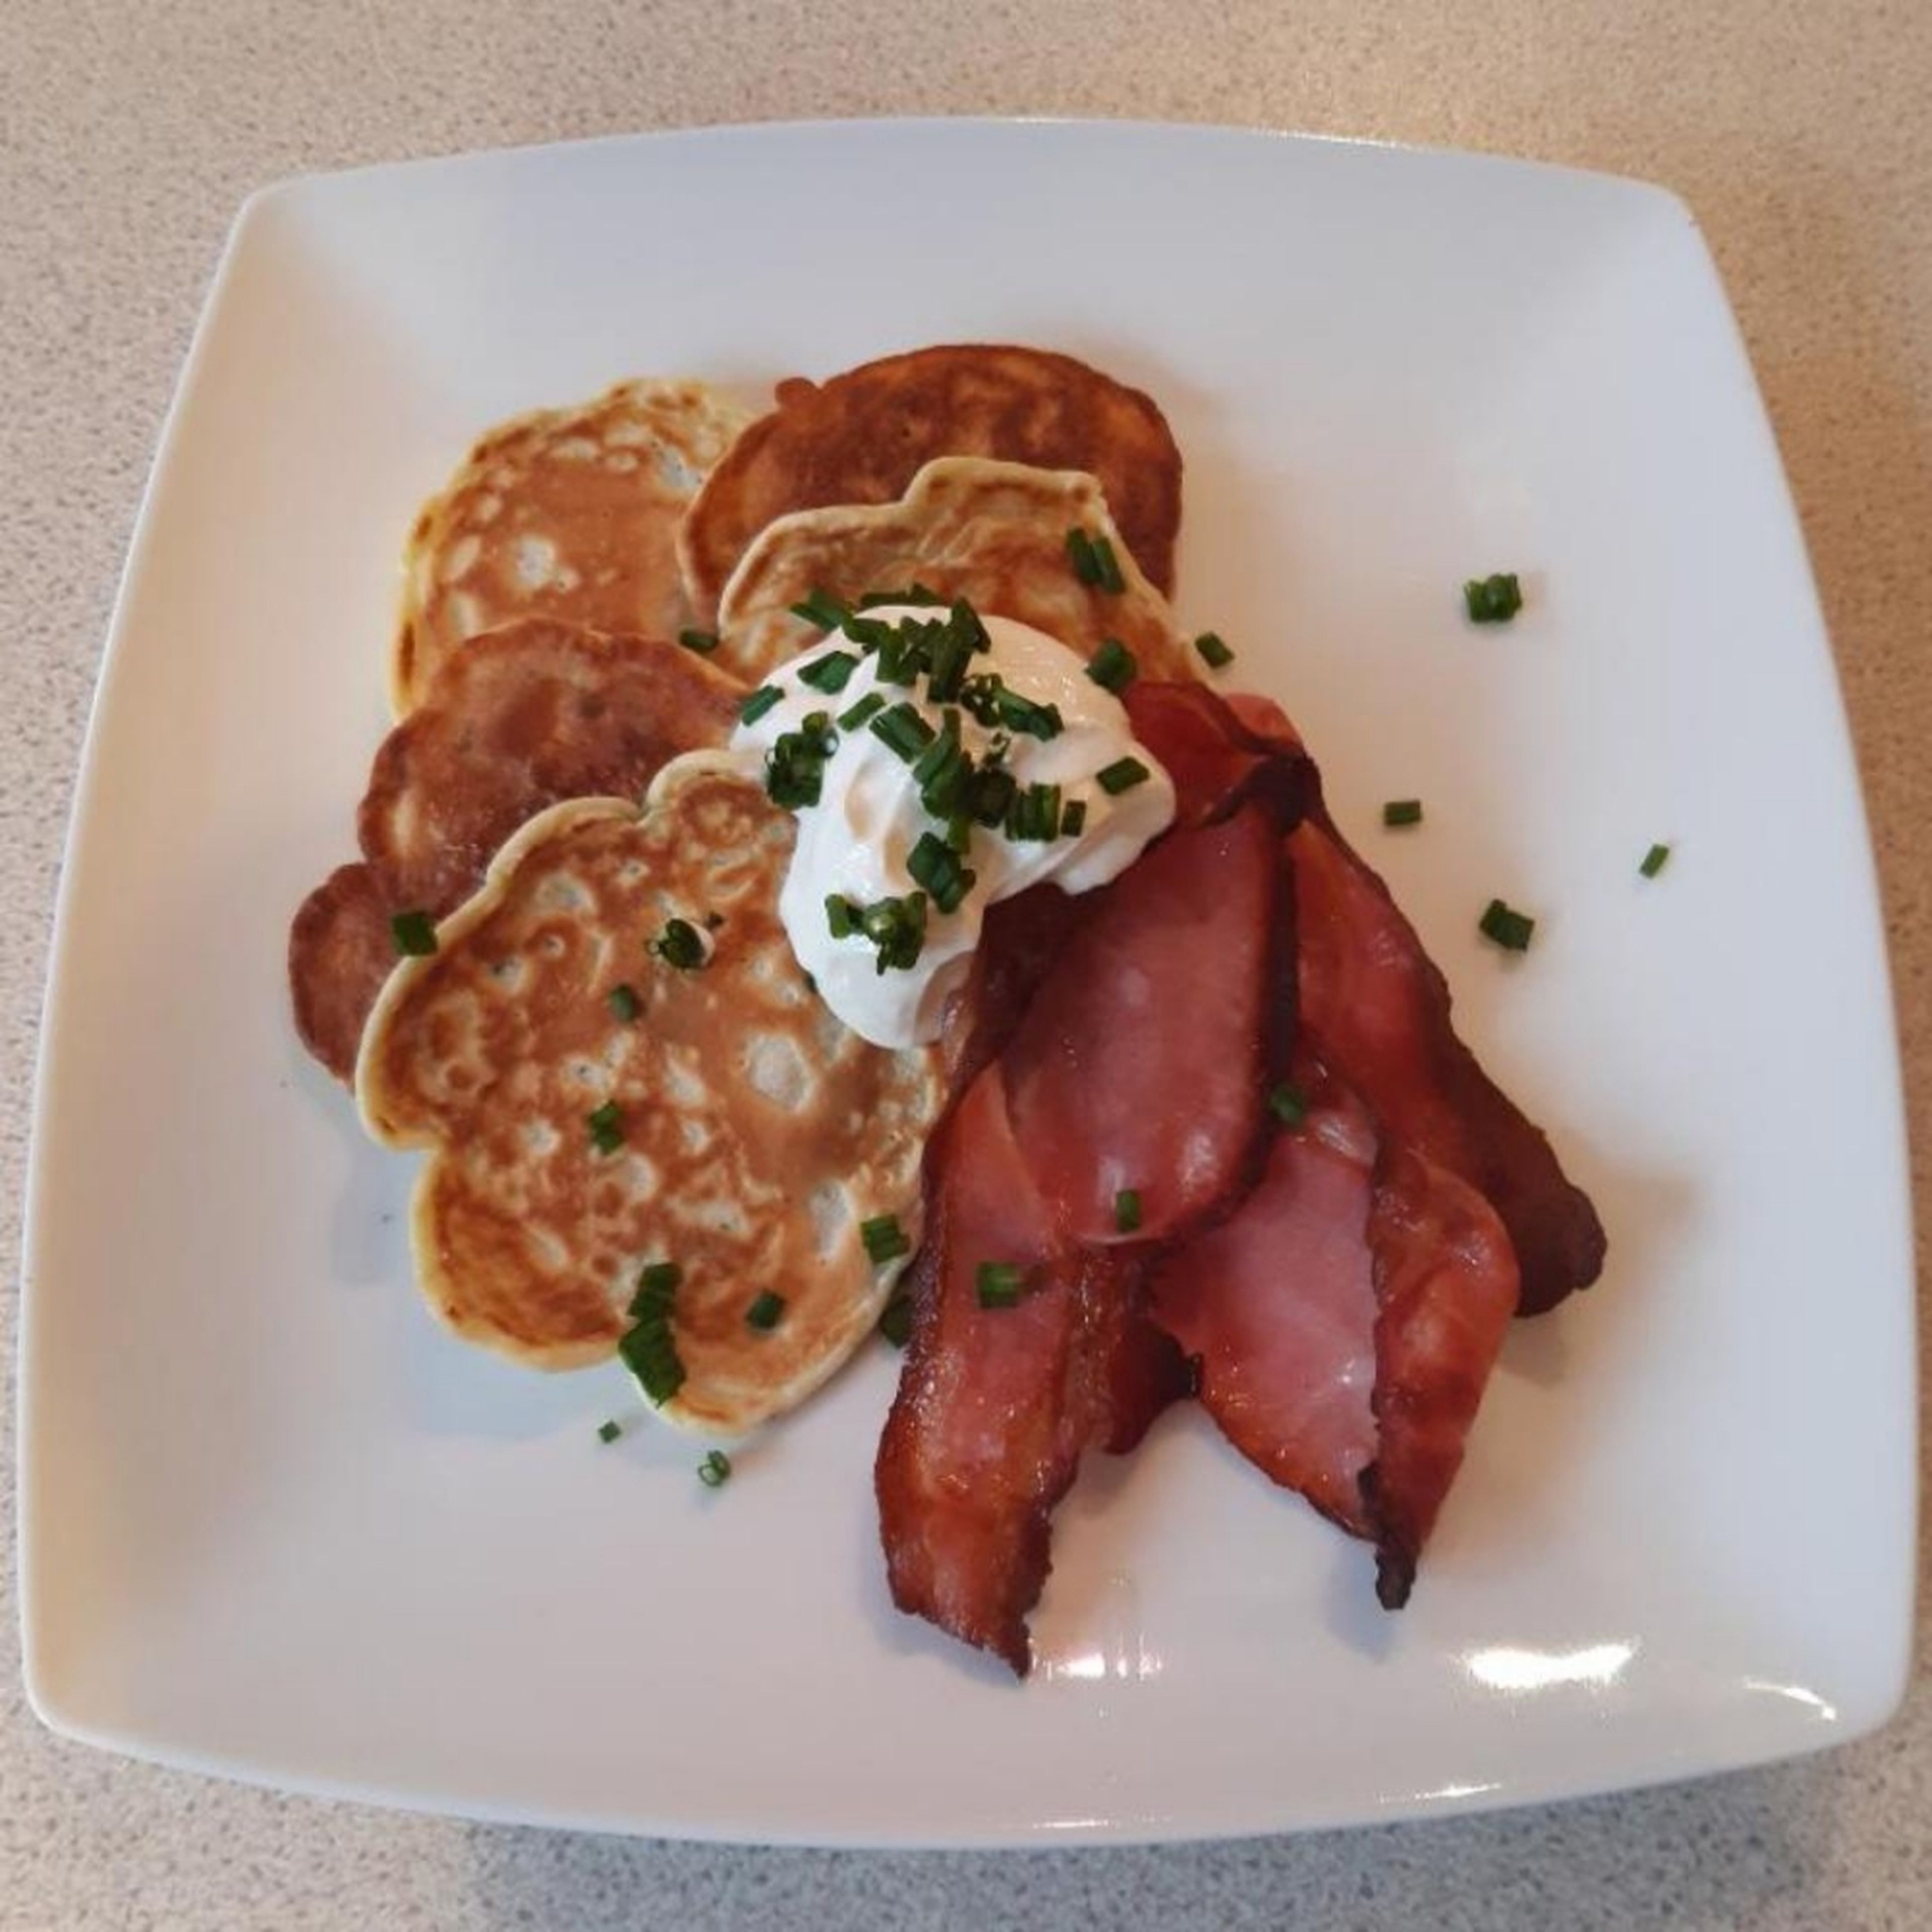 Chive and Parmesan Pancakes with Bacon